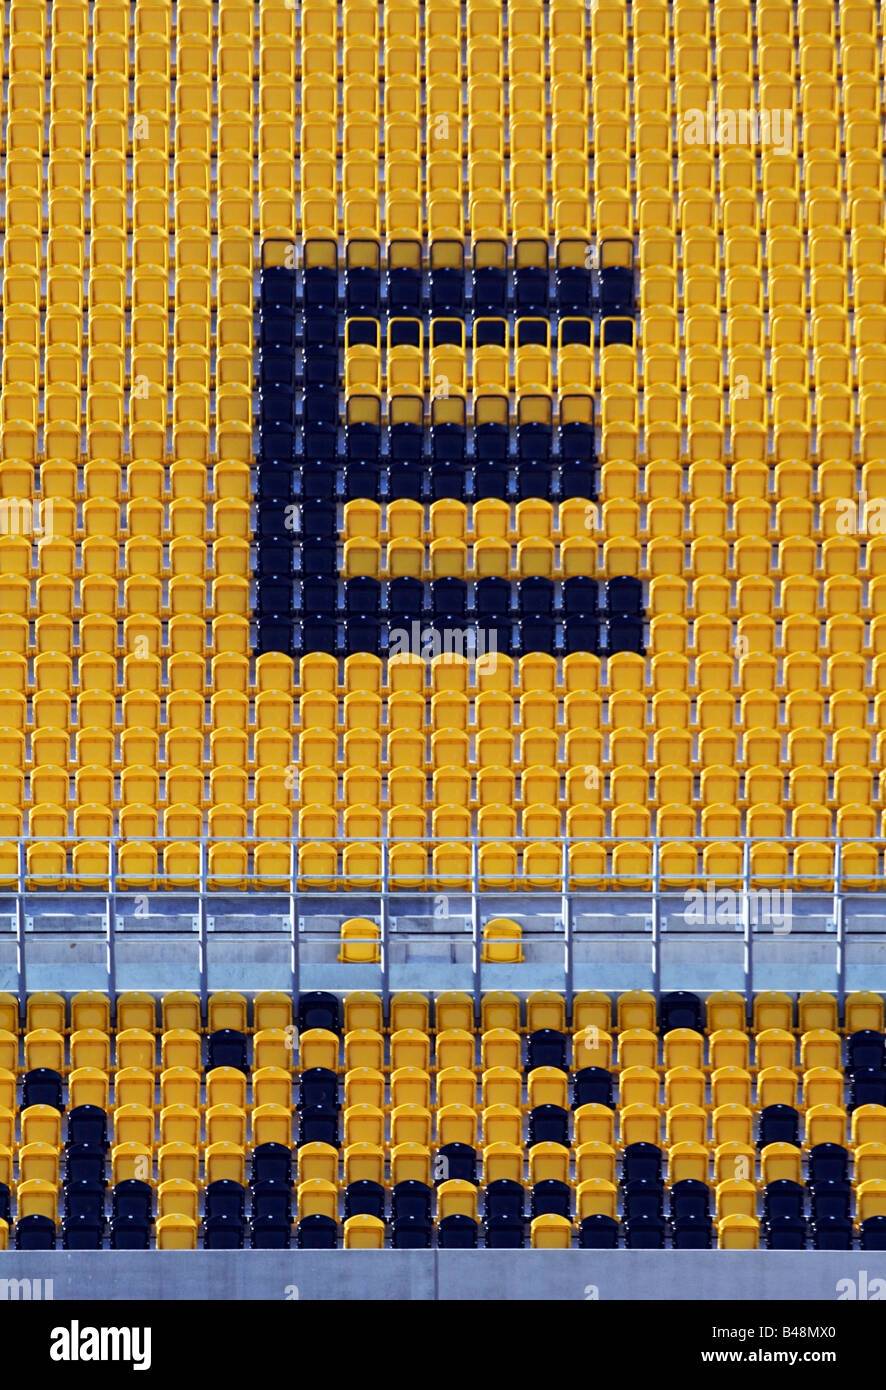 Big “E” formed by seats in a stadion Stock Photo